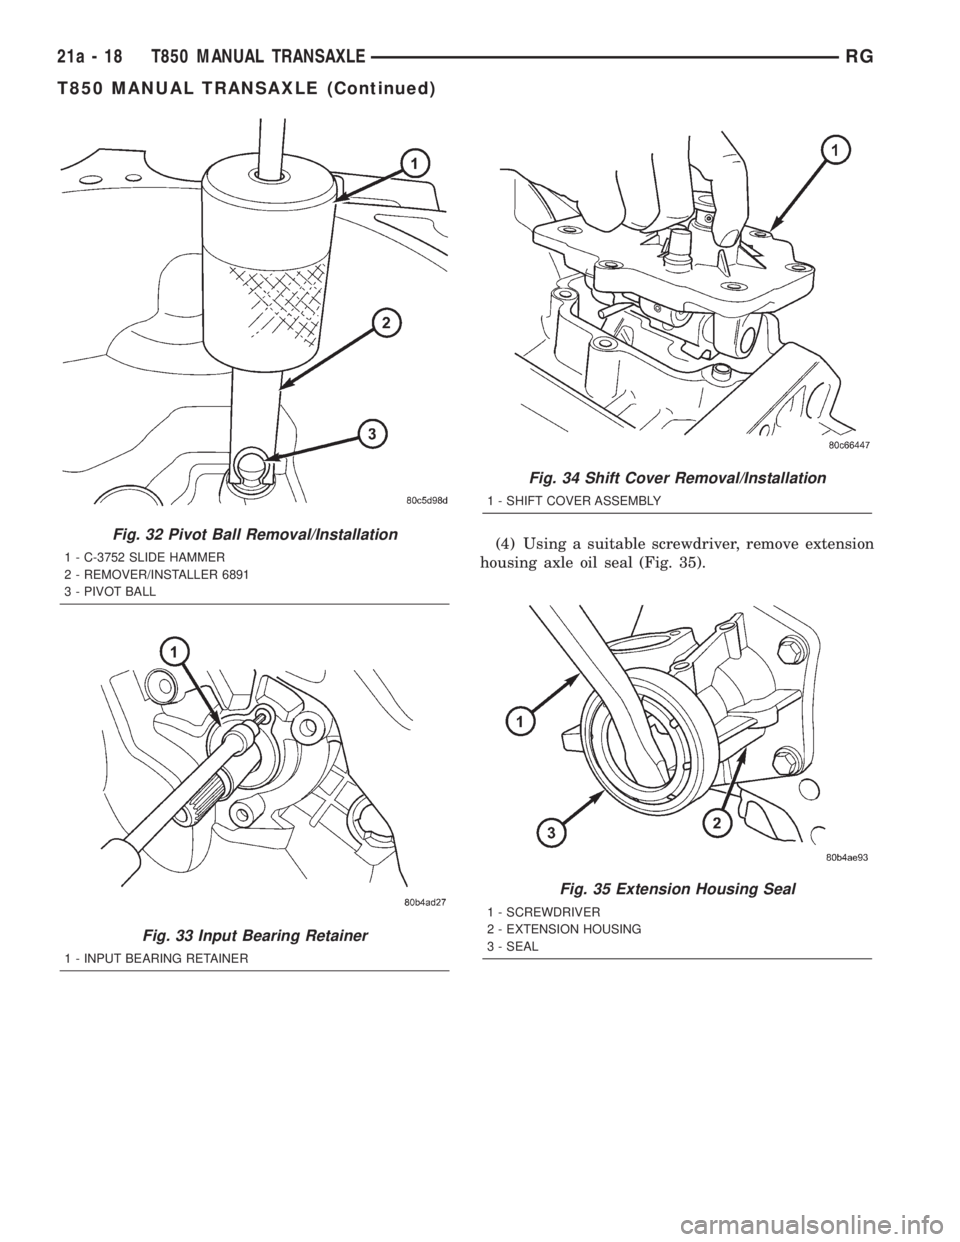 CHRYSLER VOYAGER 2001  Service Manual (4) Using a suitable screwdriver, remove extension
housing axle oil seal (Fig. 35).Fig. 32 Pivot Ball Removal/Installation
1 - C-3752 SLIDE HAMMER
2 - REMOVER/INSTALLER 6891
3 - PIVOT BALL
Fig. 33 Inp